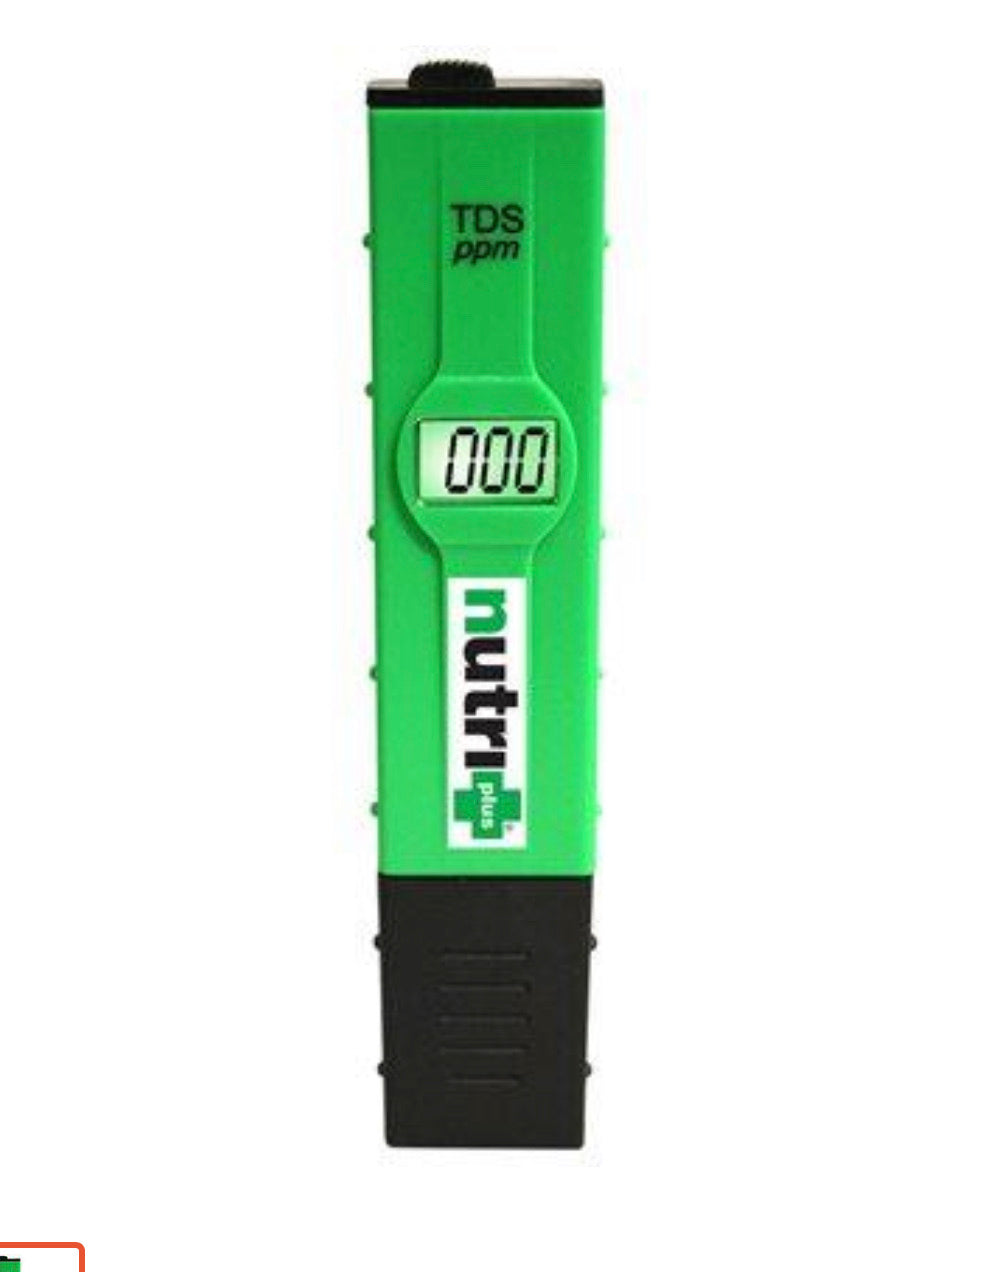 Nutri+ Quick Check - TDS Tester